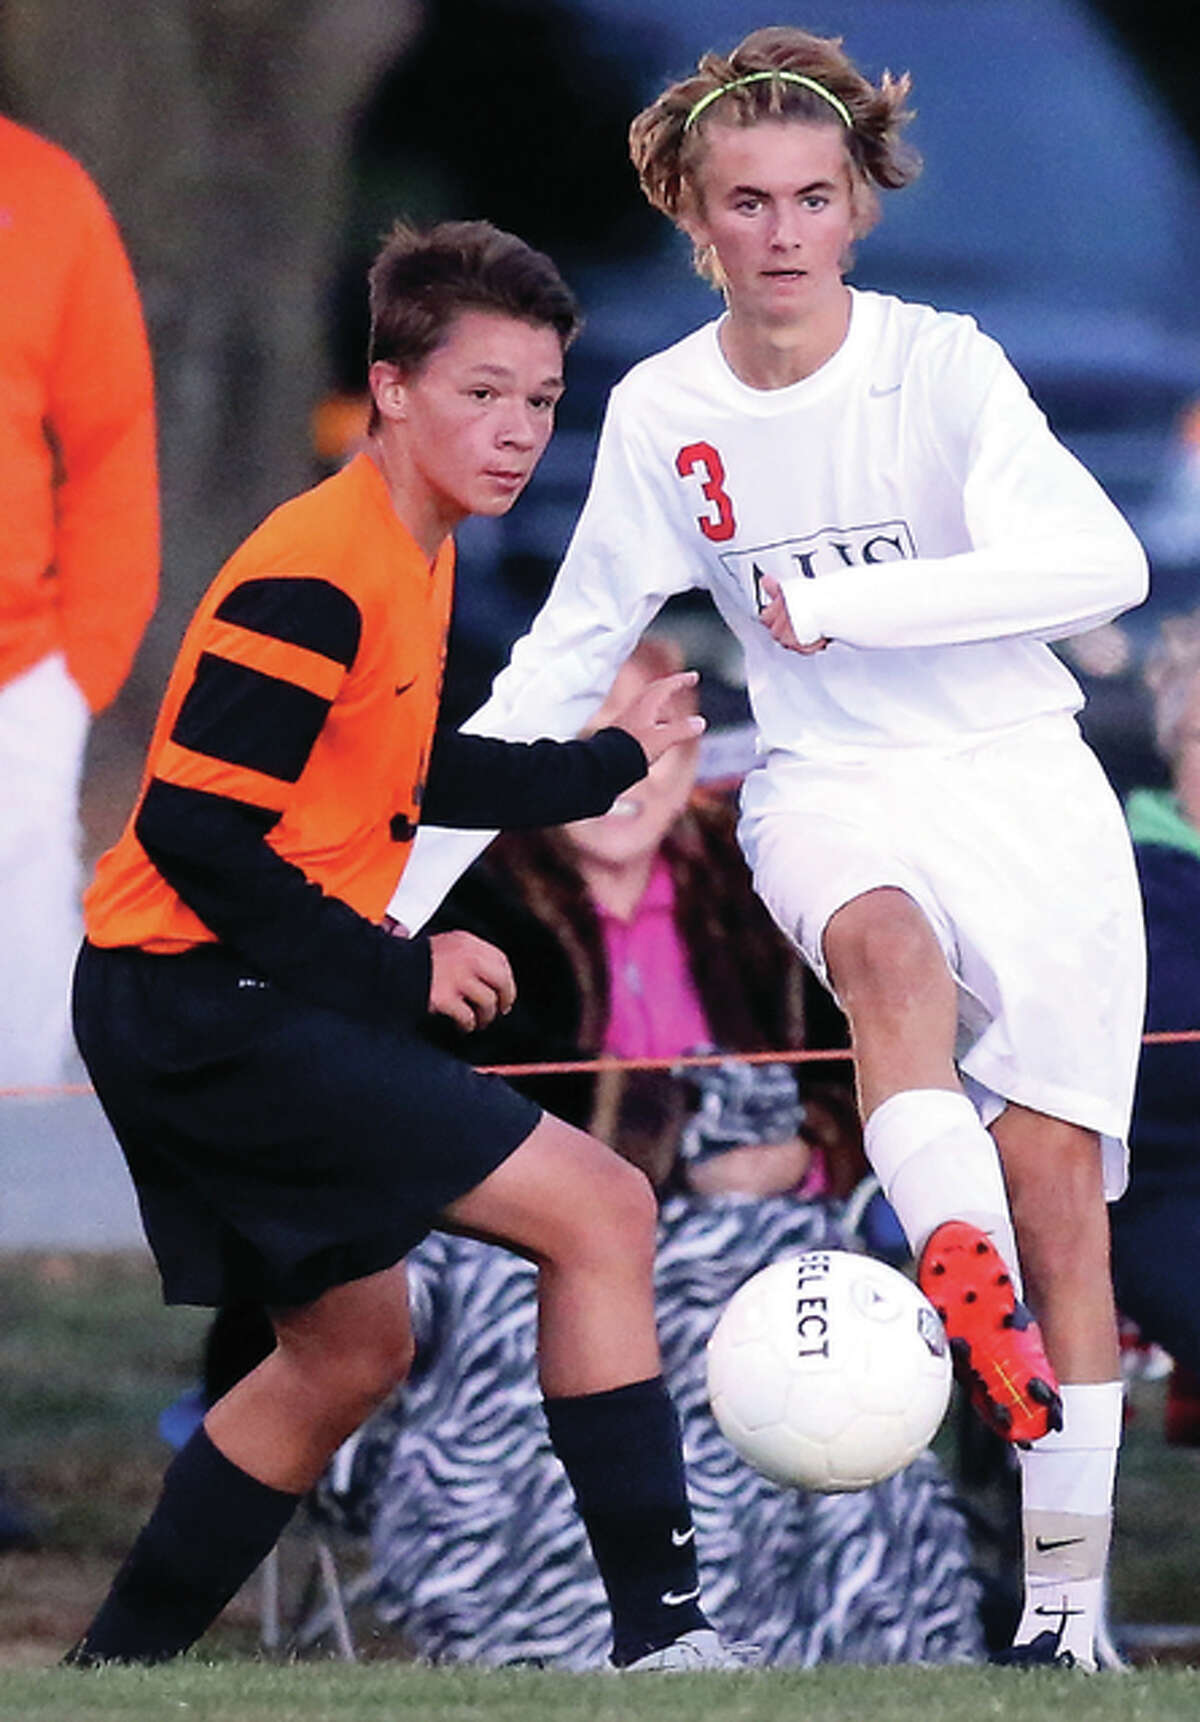 Alton’s Adam Kane (right) and Edwardsville’s Kyle Wright, shown in a Redbirds victory Oct. 1 in Alton, joined their teams in Class 3A regional soccer play Tuesday with Alton at Quincy and Edwardsville on its home field.